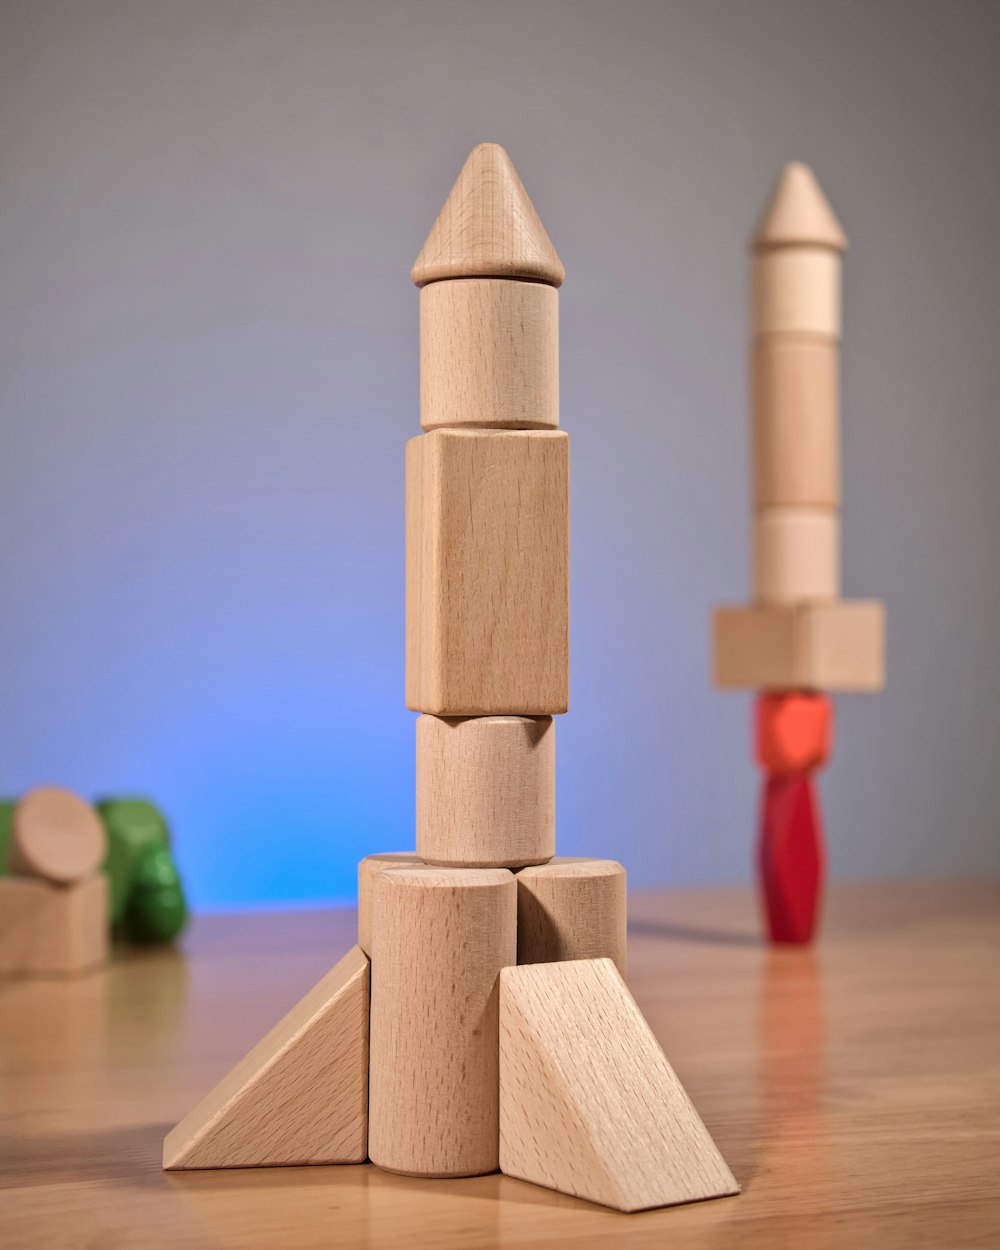 a stack of wooden blocks sitting on top of a wooden table